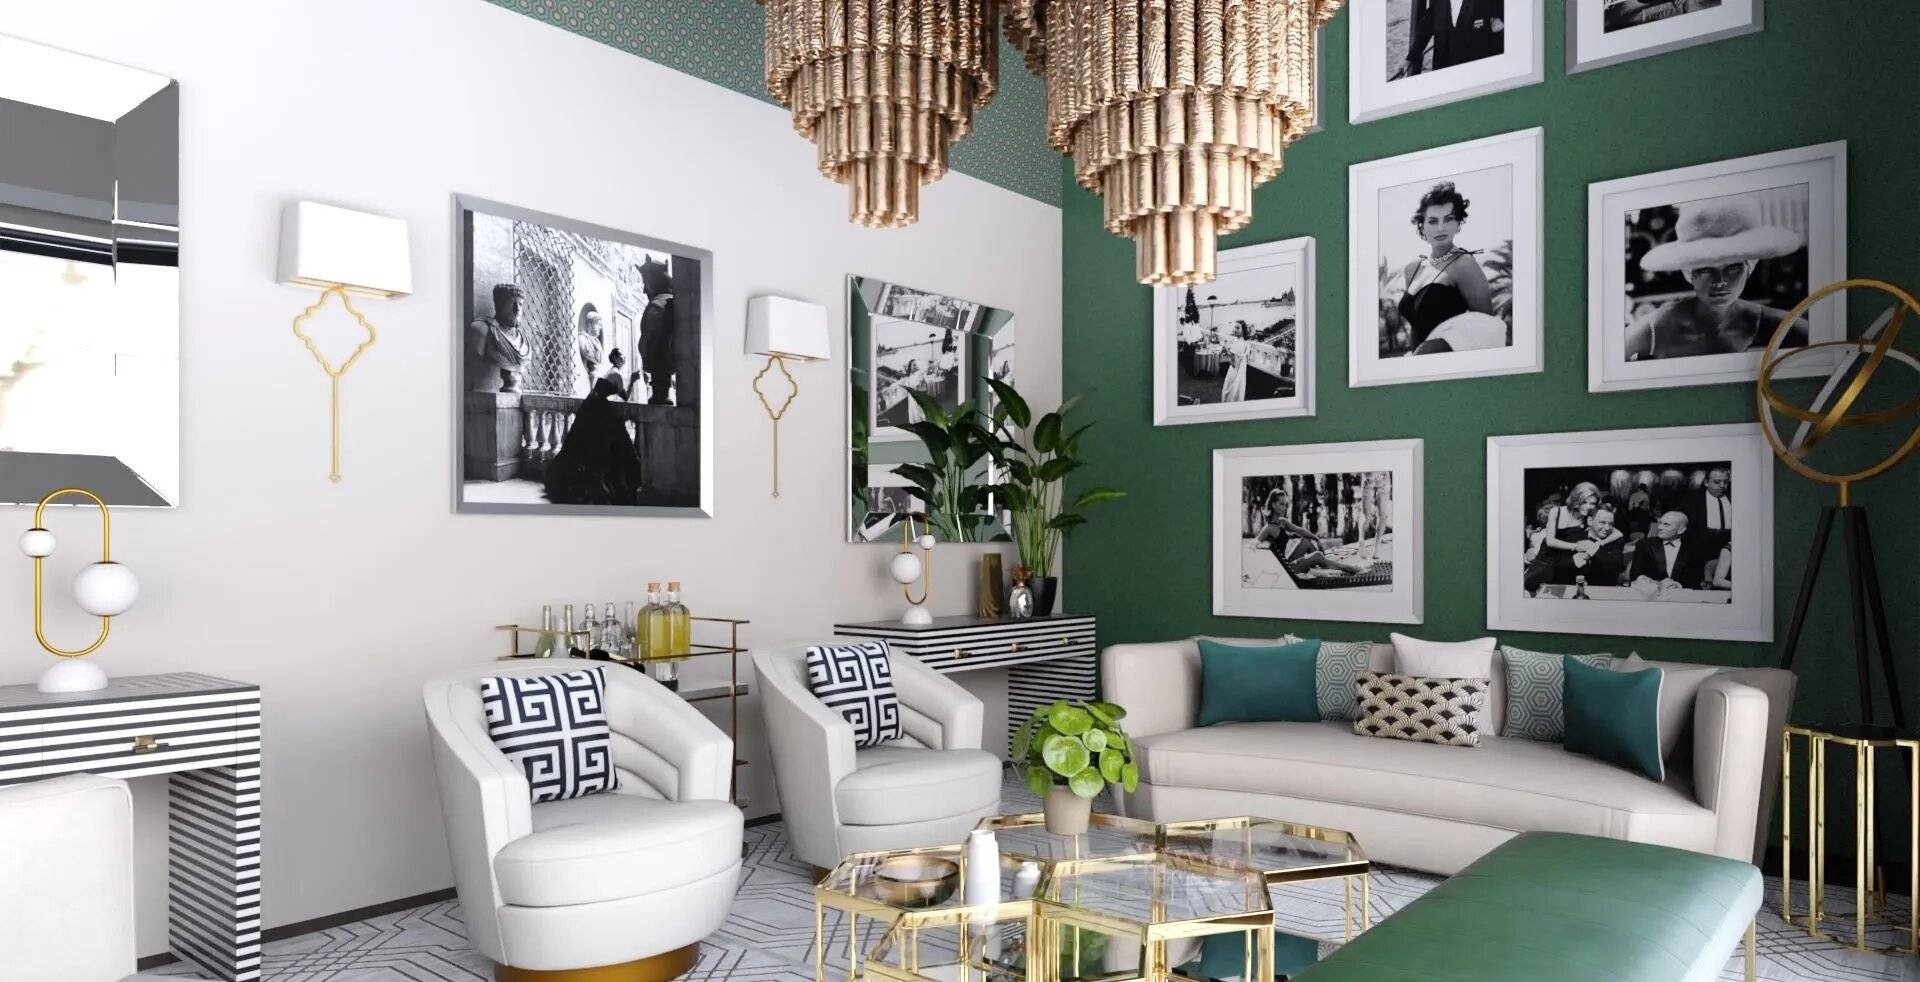 What Is The Hollywood Glam Interior Design Style?